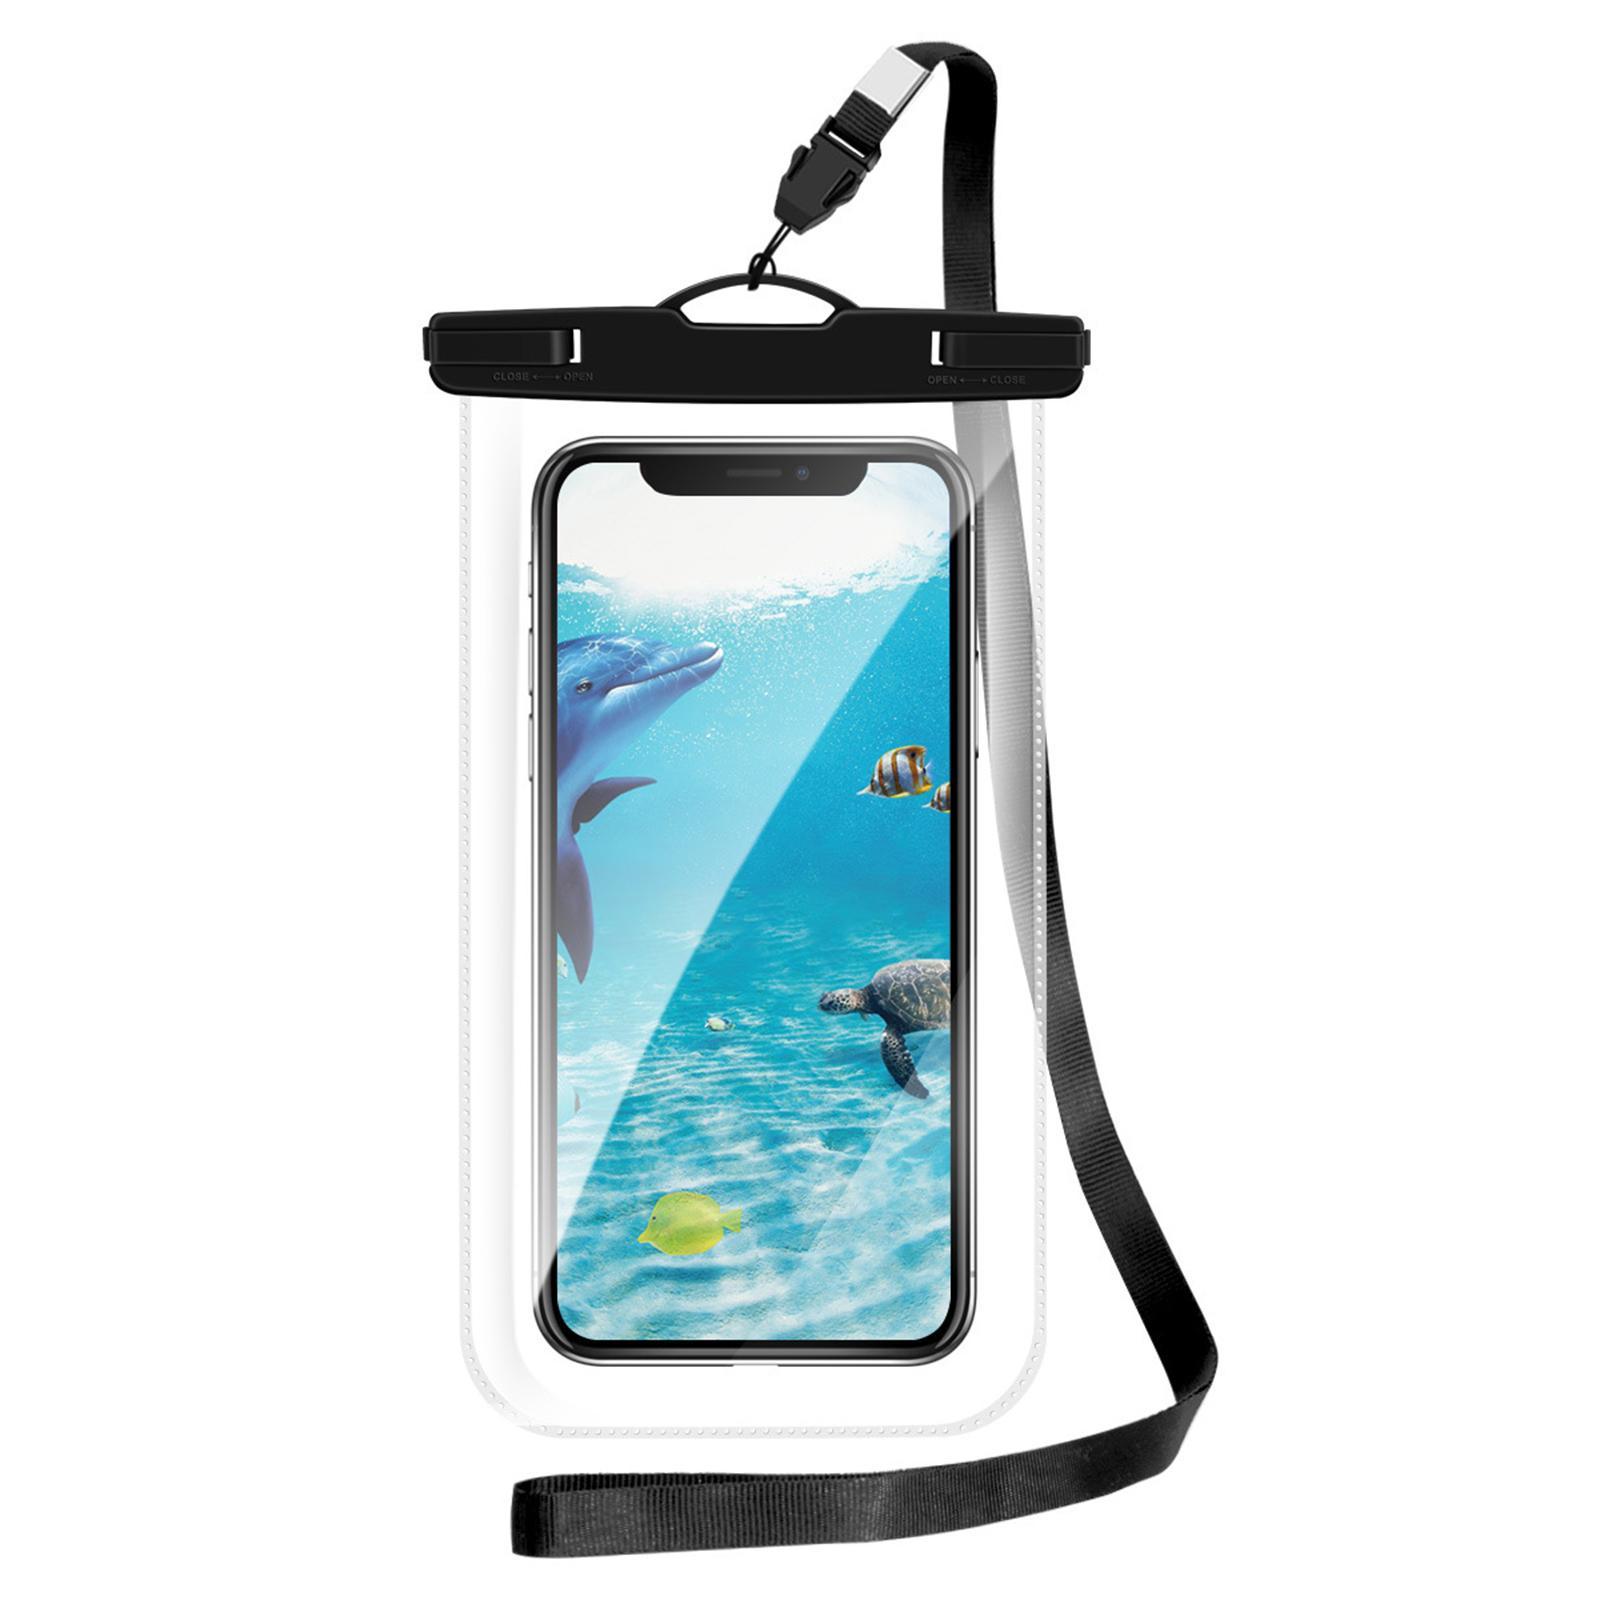 secure-on-the-go-attaching-a-lanyard-to-your-waterproof-phone-bag